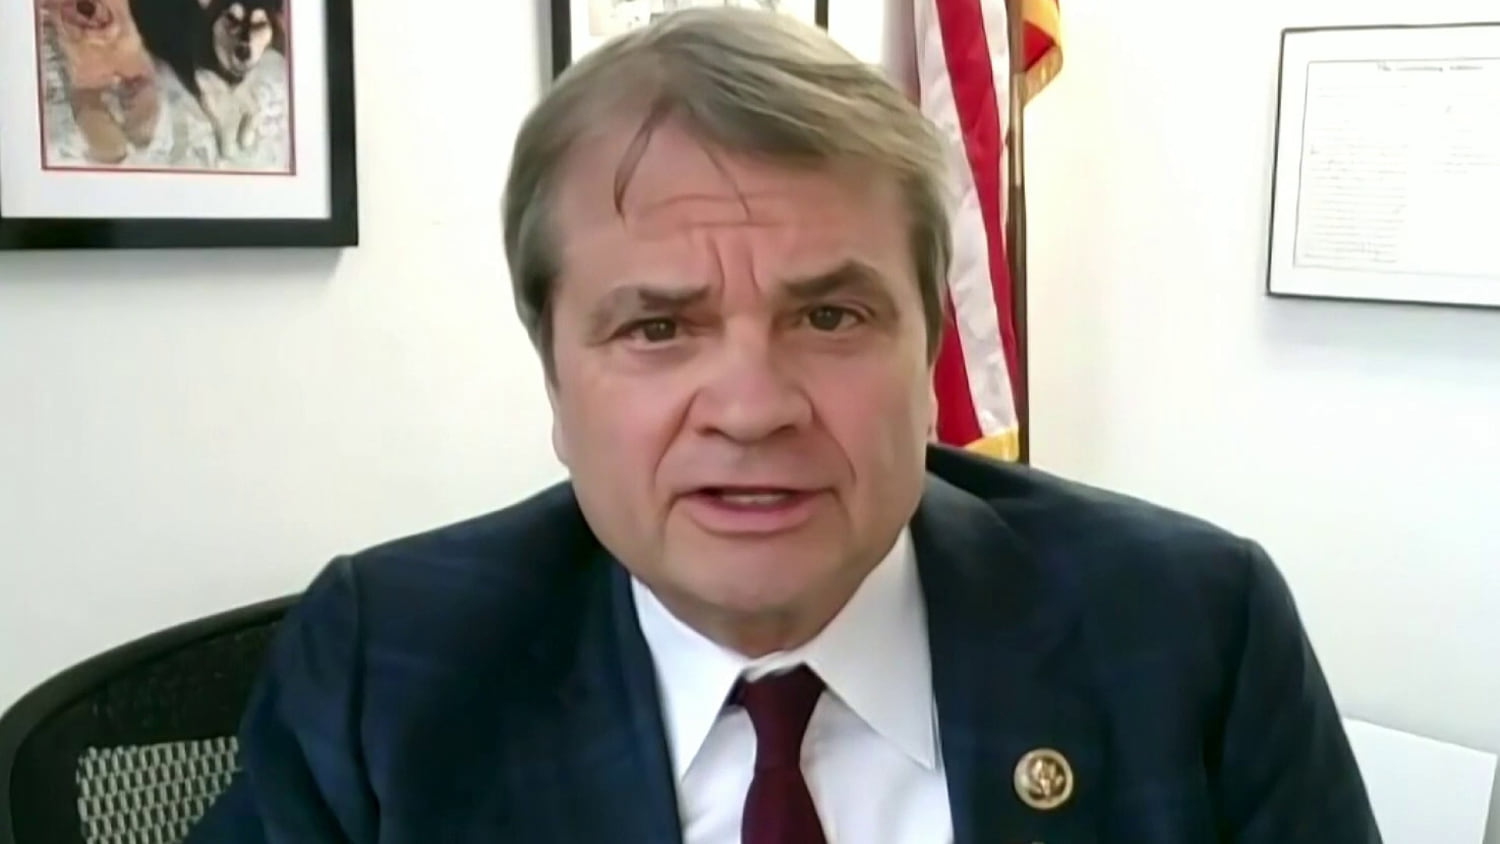 Johnson needs to compromise with Democrats to retain speakership, Rep. Quigley says